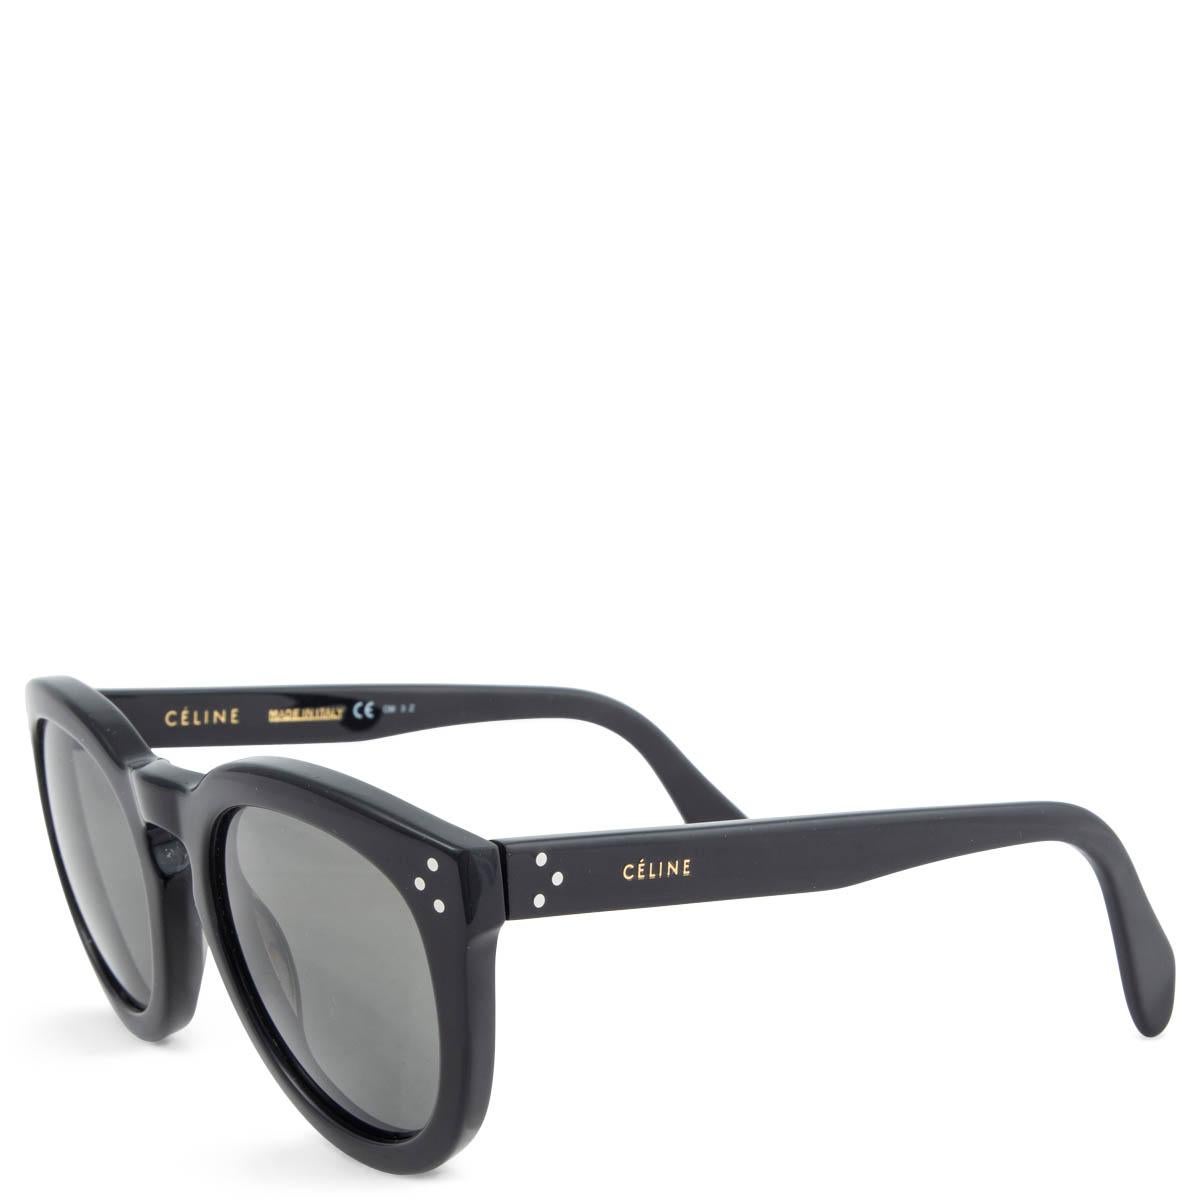 100% authentic Céline CL 41801/S Preppy sunglasses in black acetate with grey lenses. Polarized. Have been worn and show a soft scratch on the right lens. Overall in excellent condition. Come with Prada hard case. 

Measurements
Model	CL 41801/S